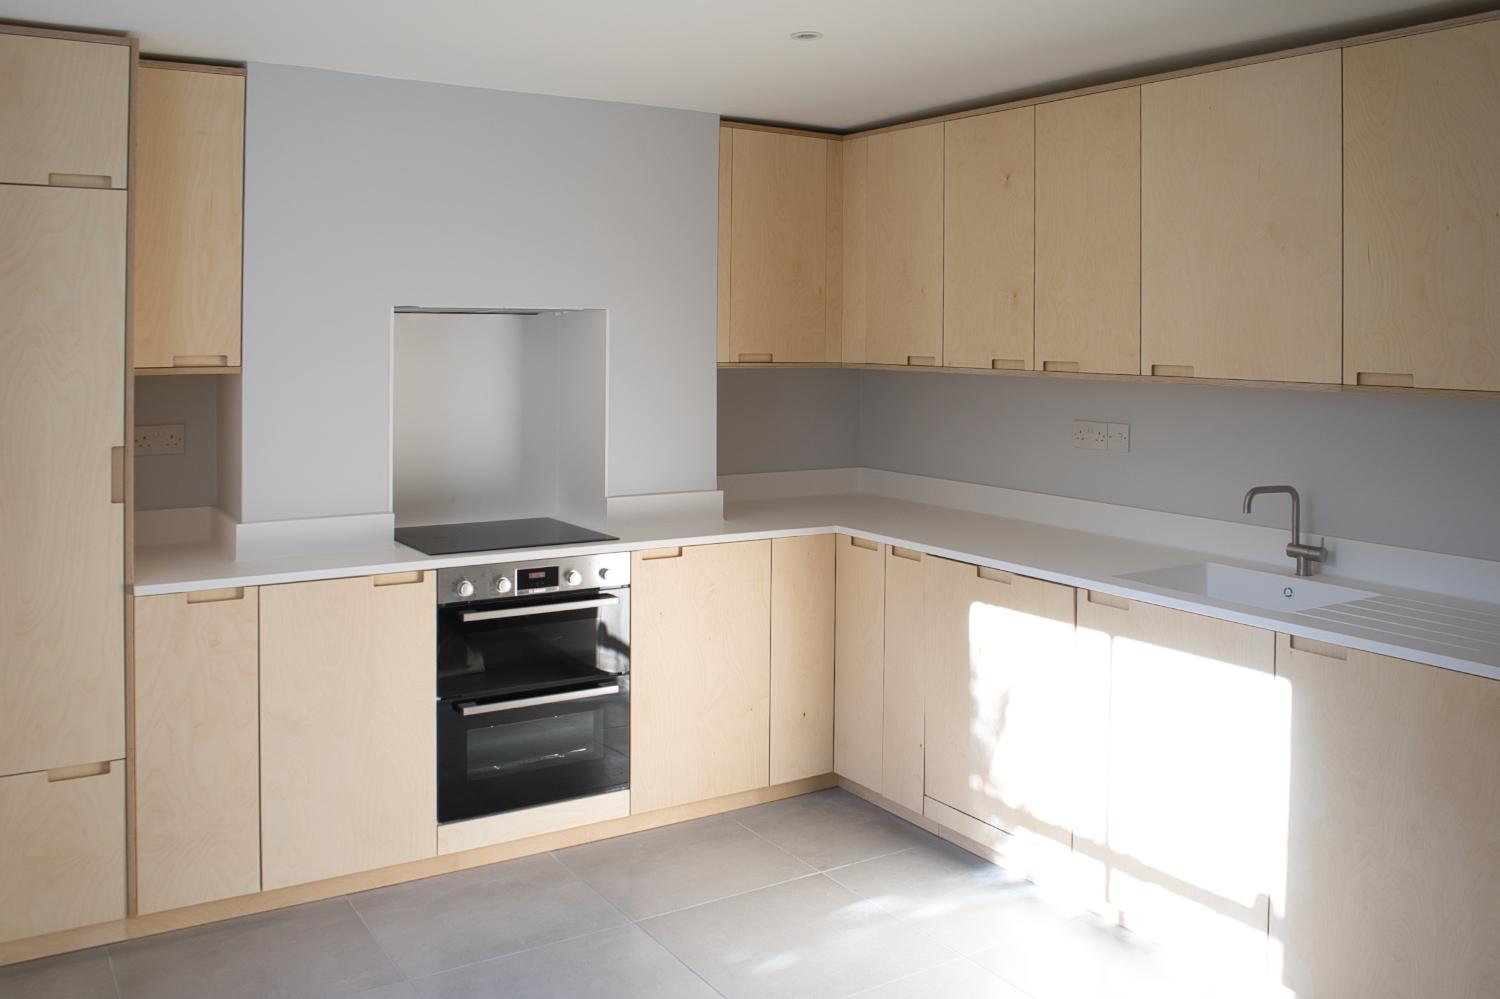 Birch ply kitchen with grey floor tiles and blue walls